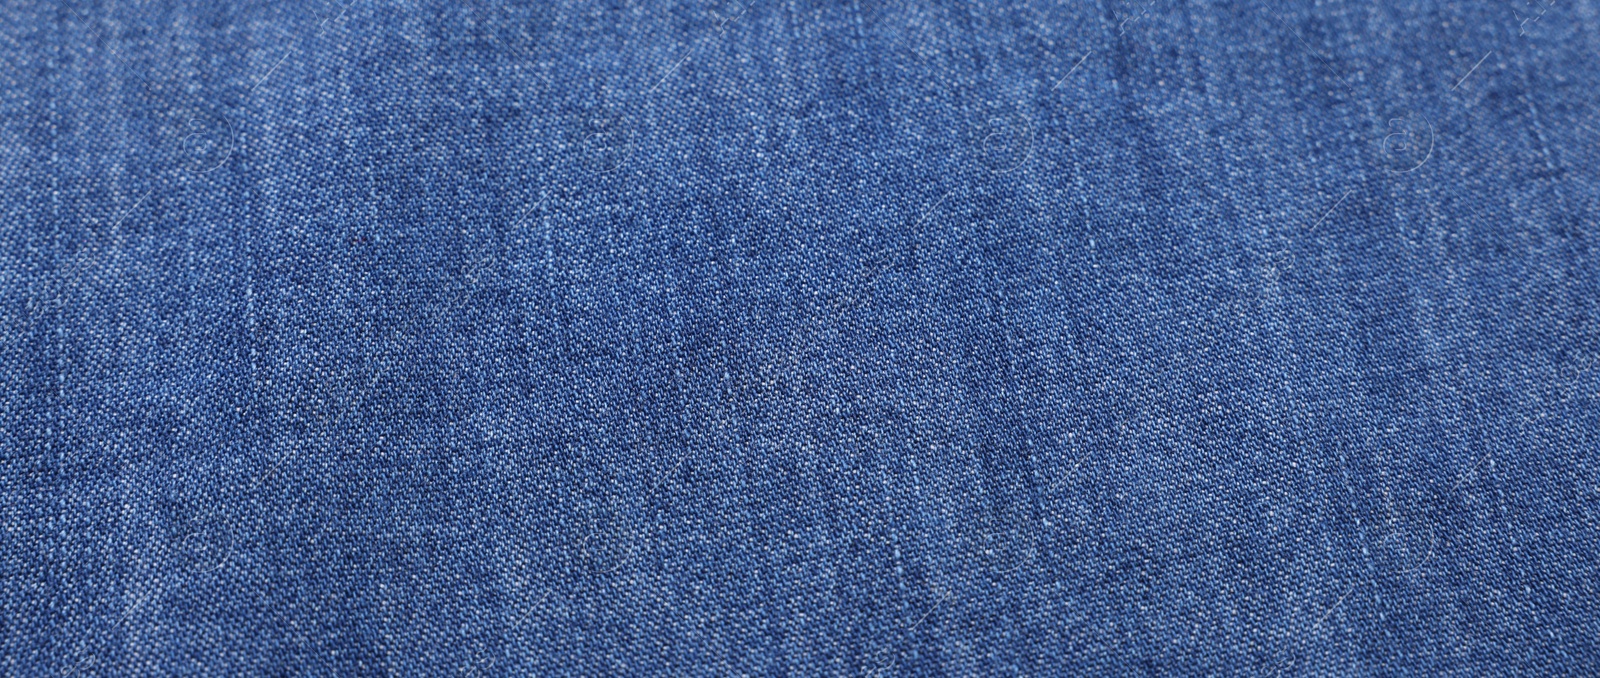 Photo of Texture of blue fabric as background, top view